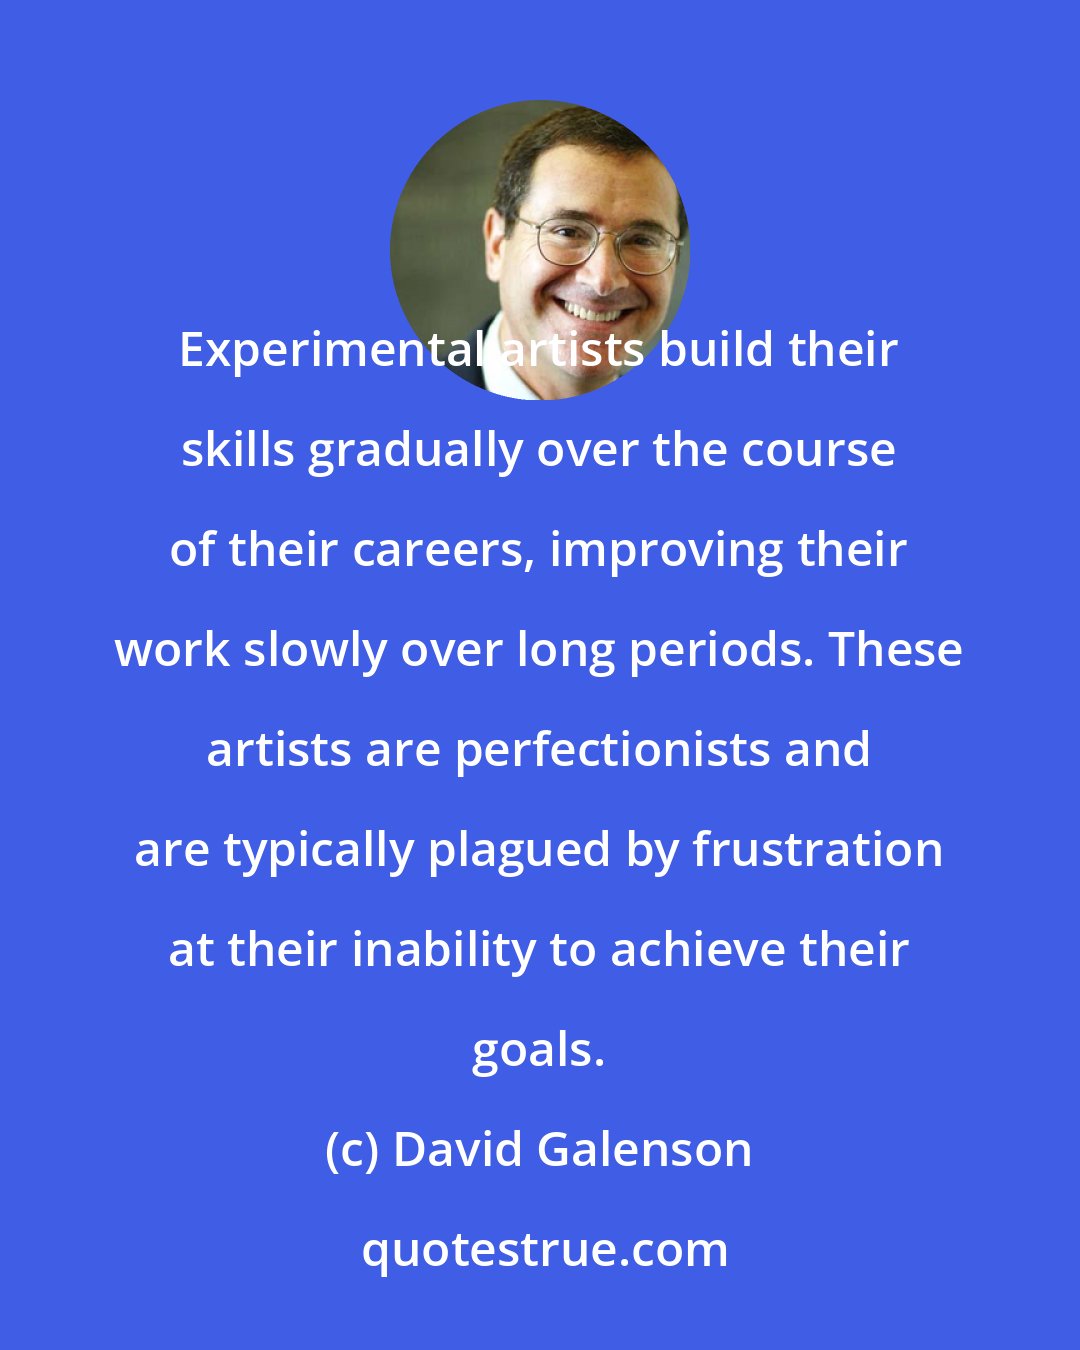 David Galenson: Experimental artists build their skills gradually over the course of their careers, improving their work slowly over long periods. These artists are perfectionists and are typically plagued by frustration at their inability to achieve their goals.